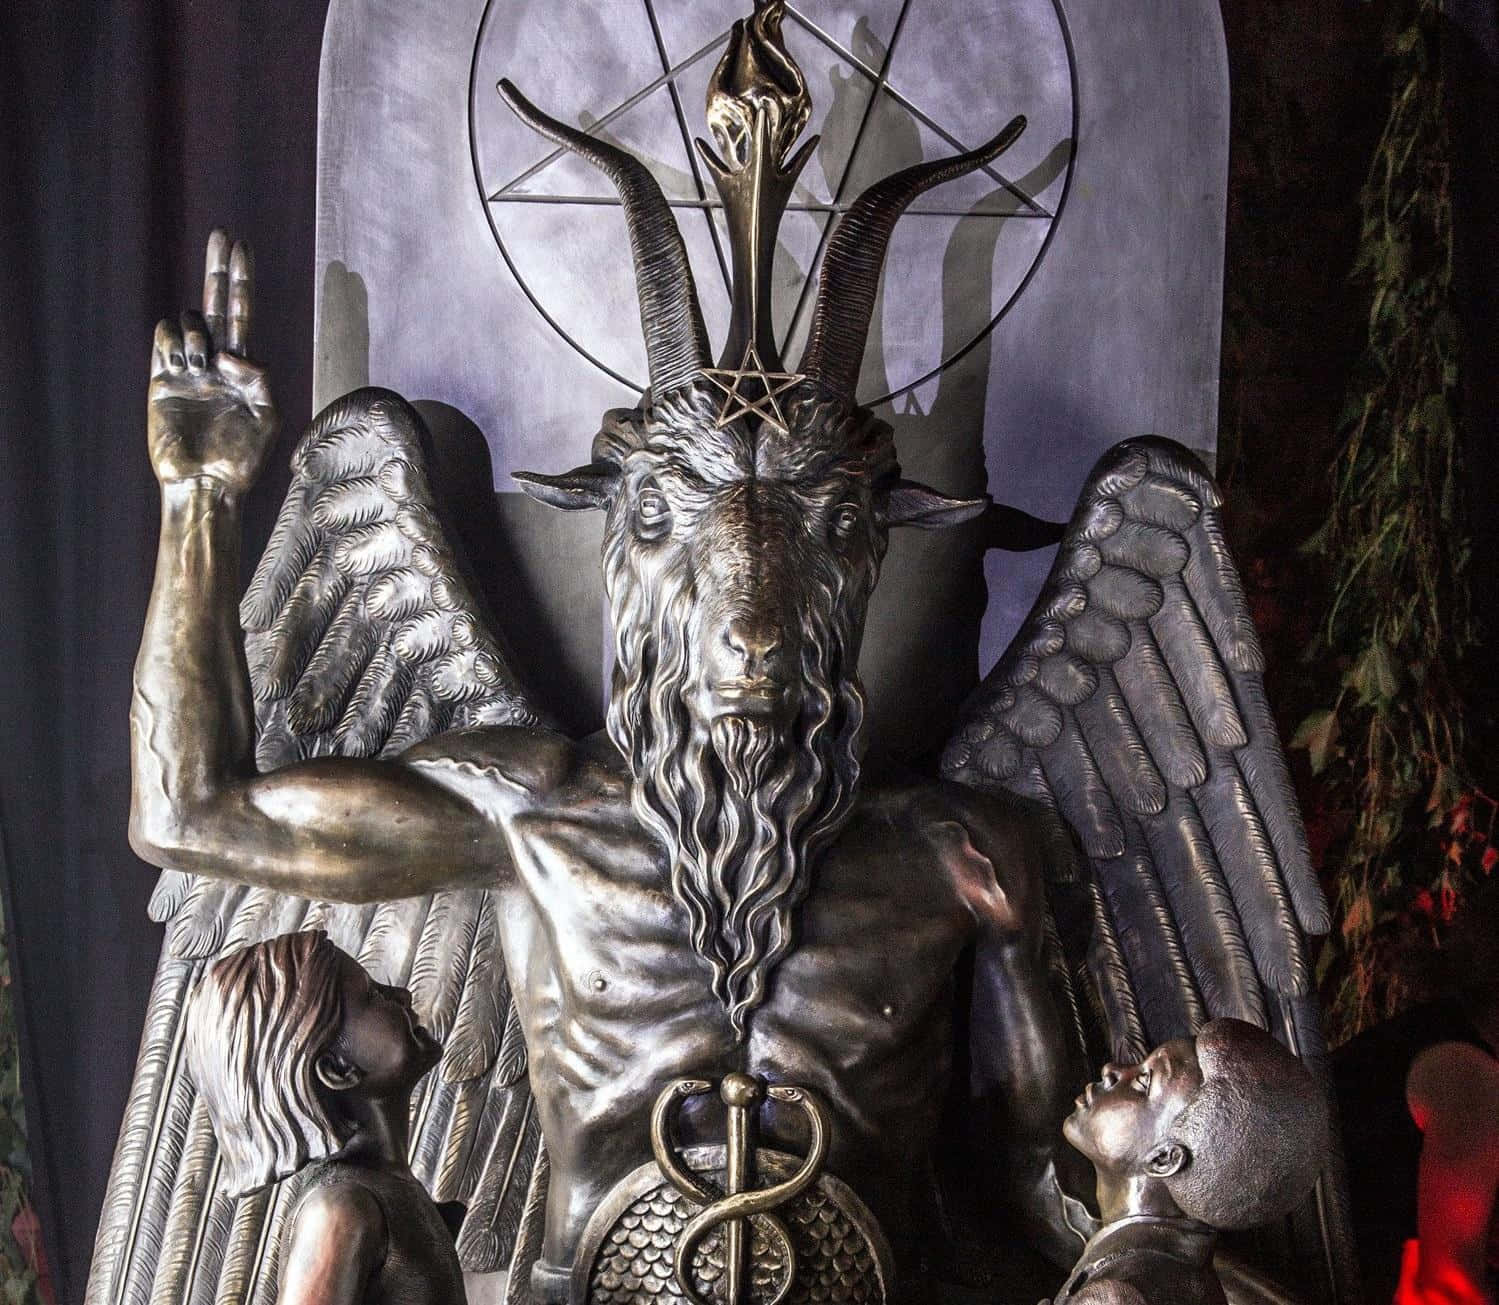 A demonic figure in suit, cloak and horns to showcase the dark undertone of Satanic